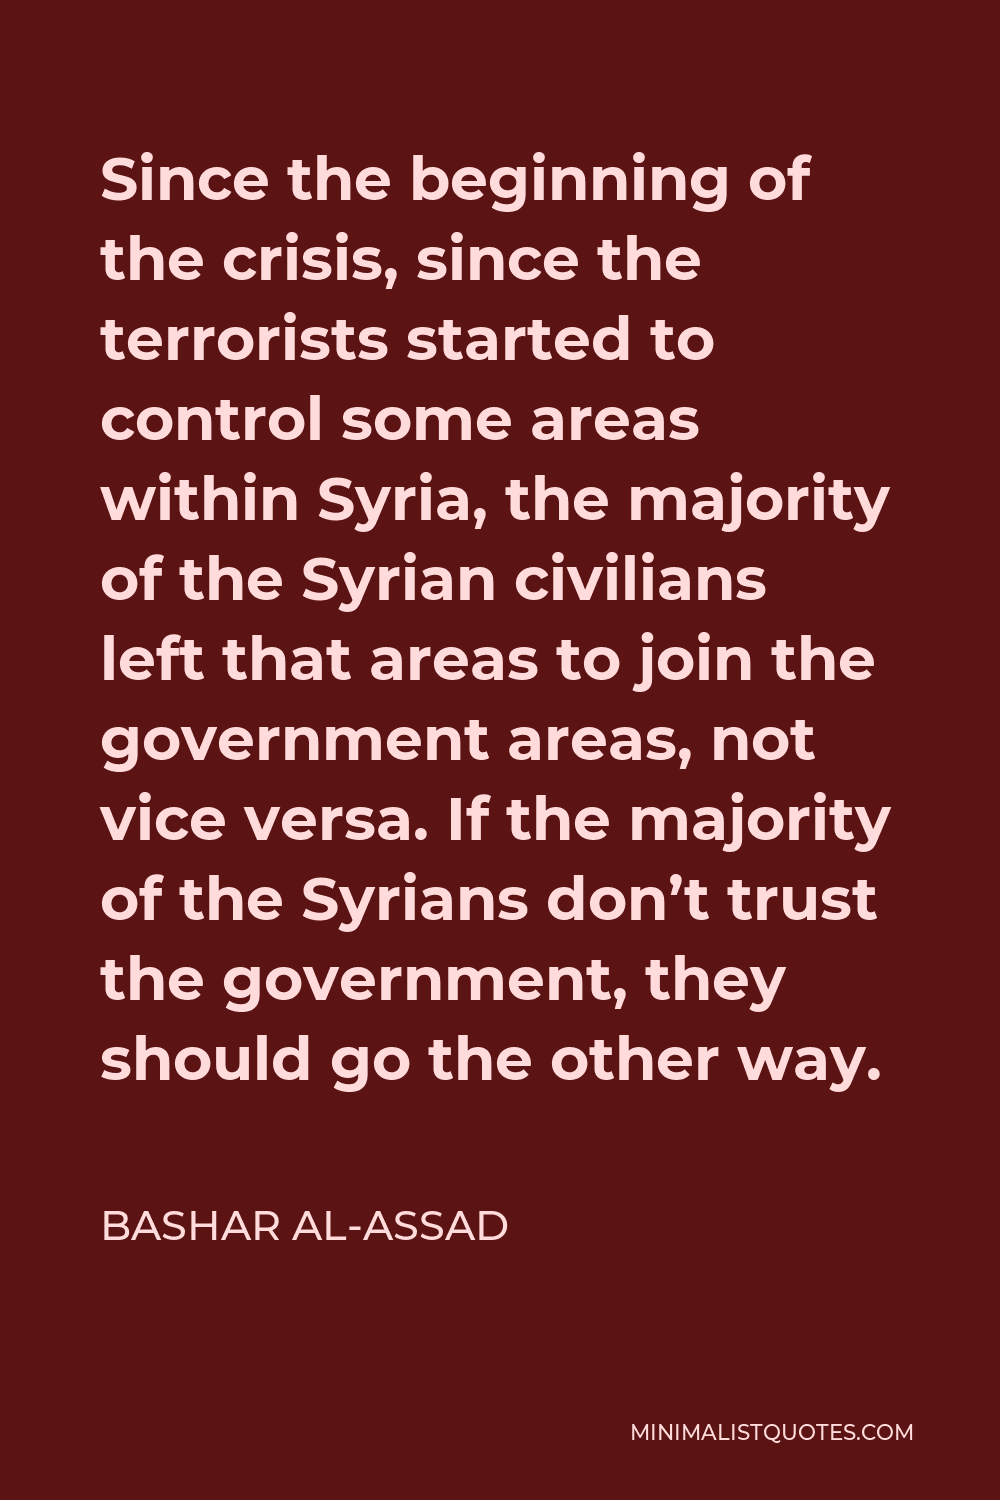 Bashar al-Assad Quote - Since the beginning of the crisis, since the terrorists started to control some areas within Syria, the majority of the Syrian civilians left that areas to join the government areas, not vice versa. If the majority of the Syrians don’t trust the government, they should go the other way.